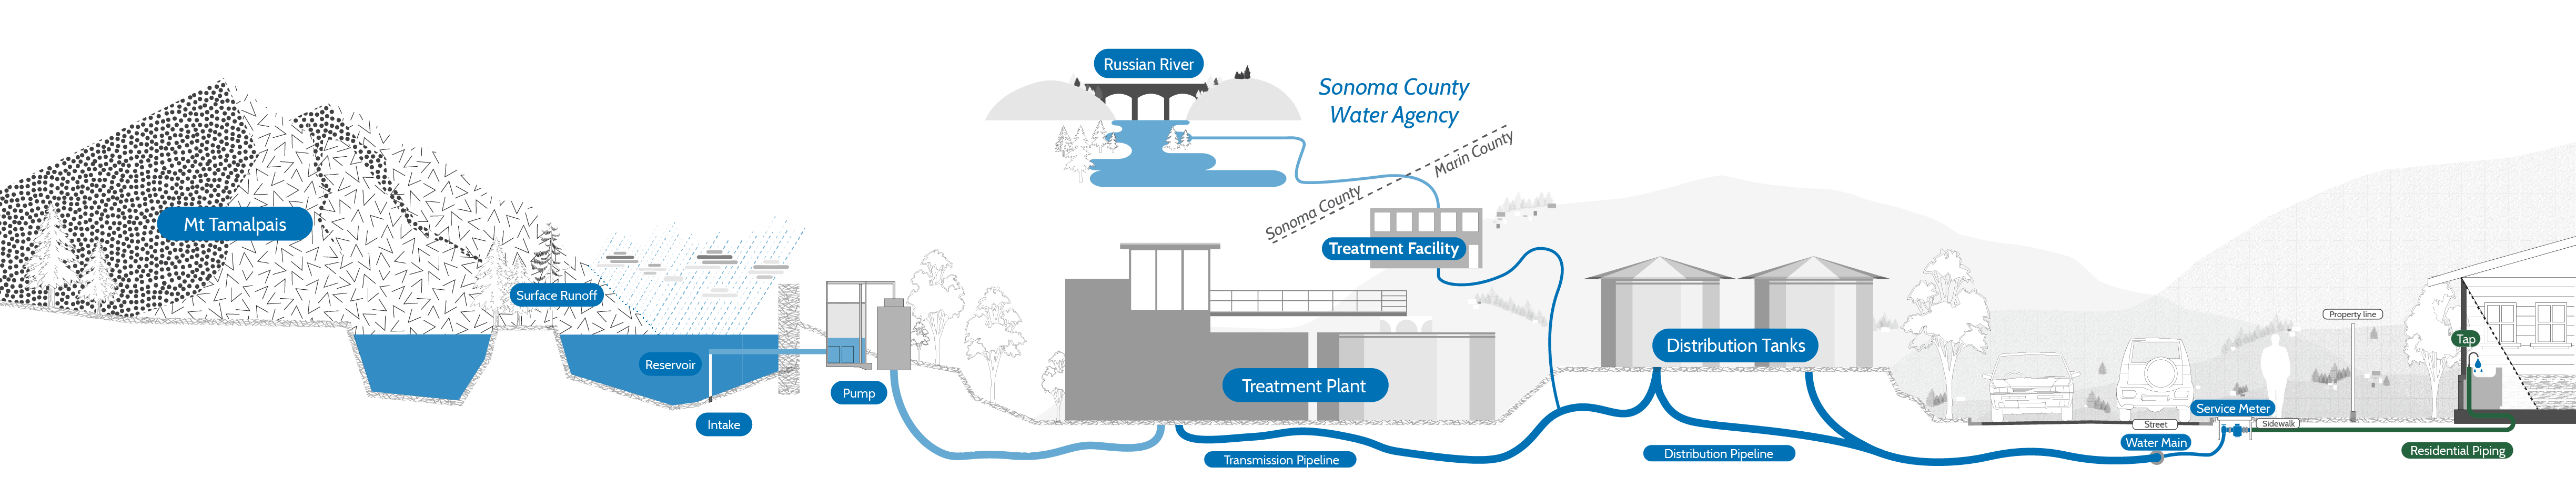 Graphic of water traveling through complex water system